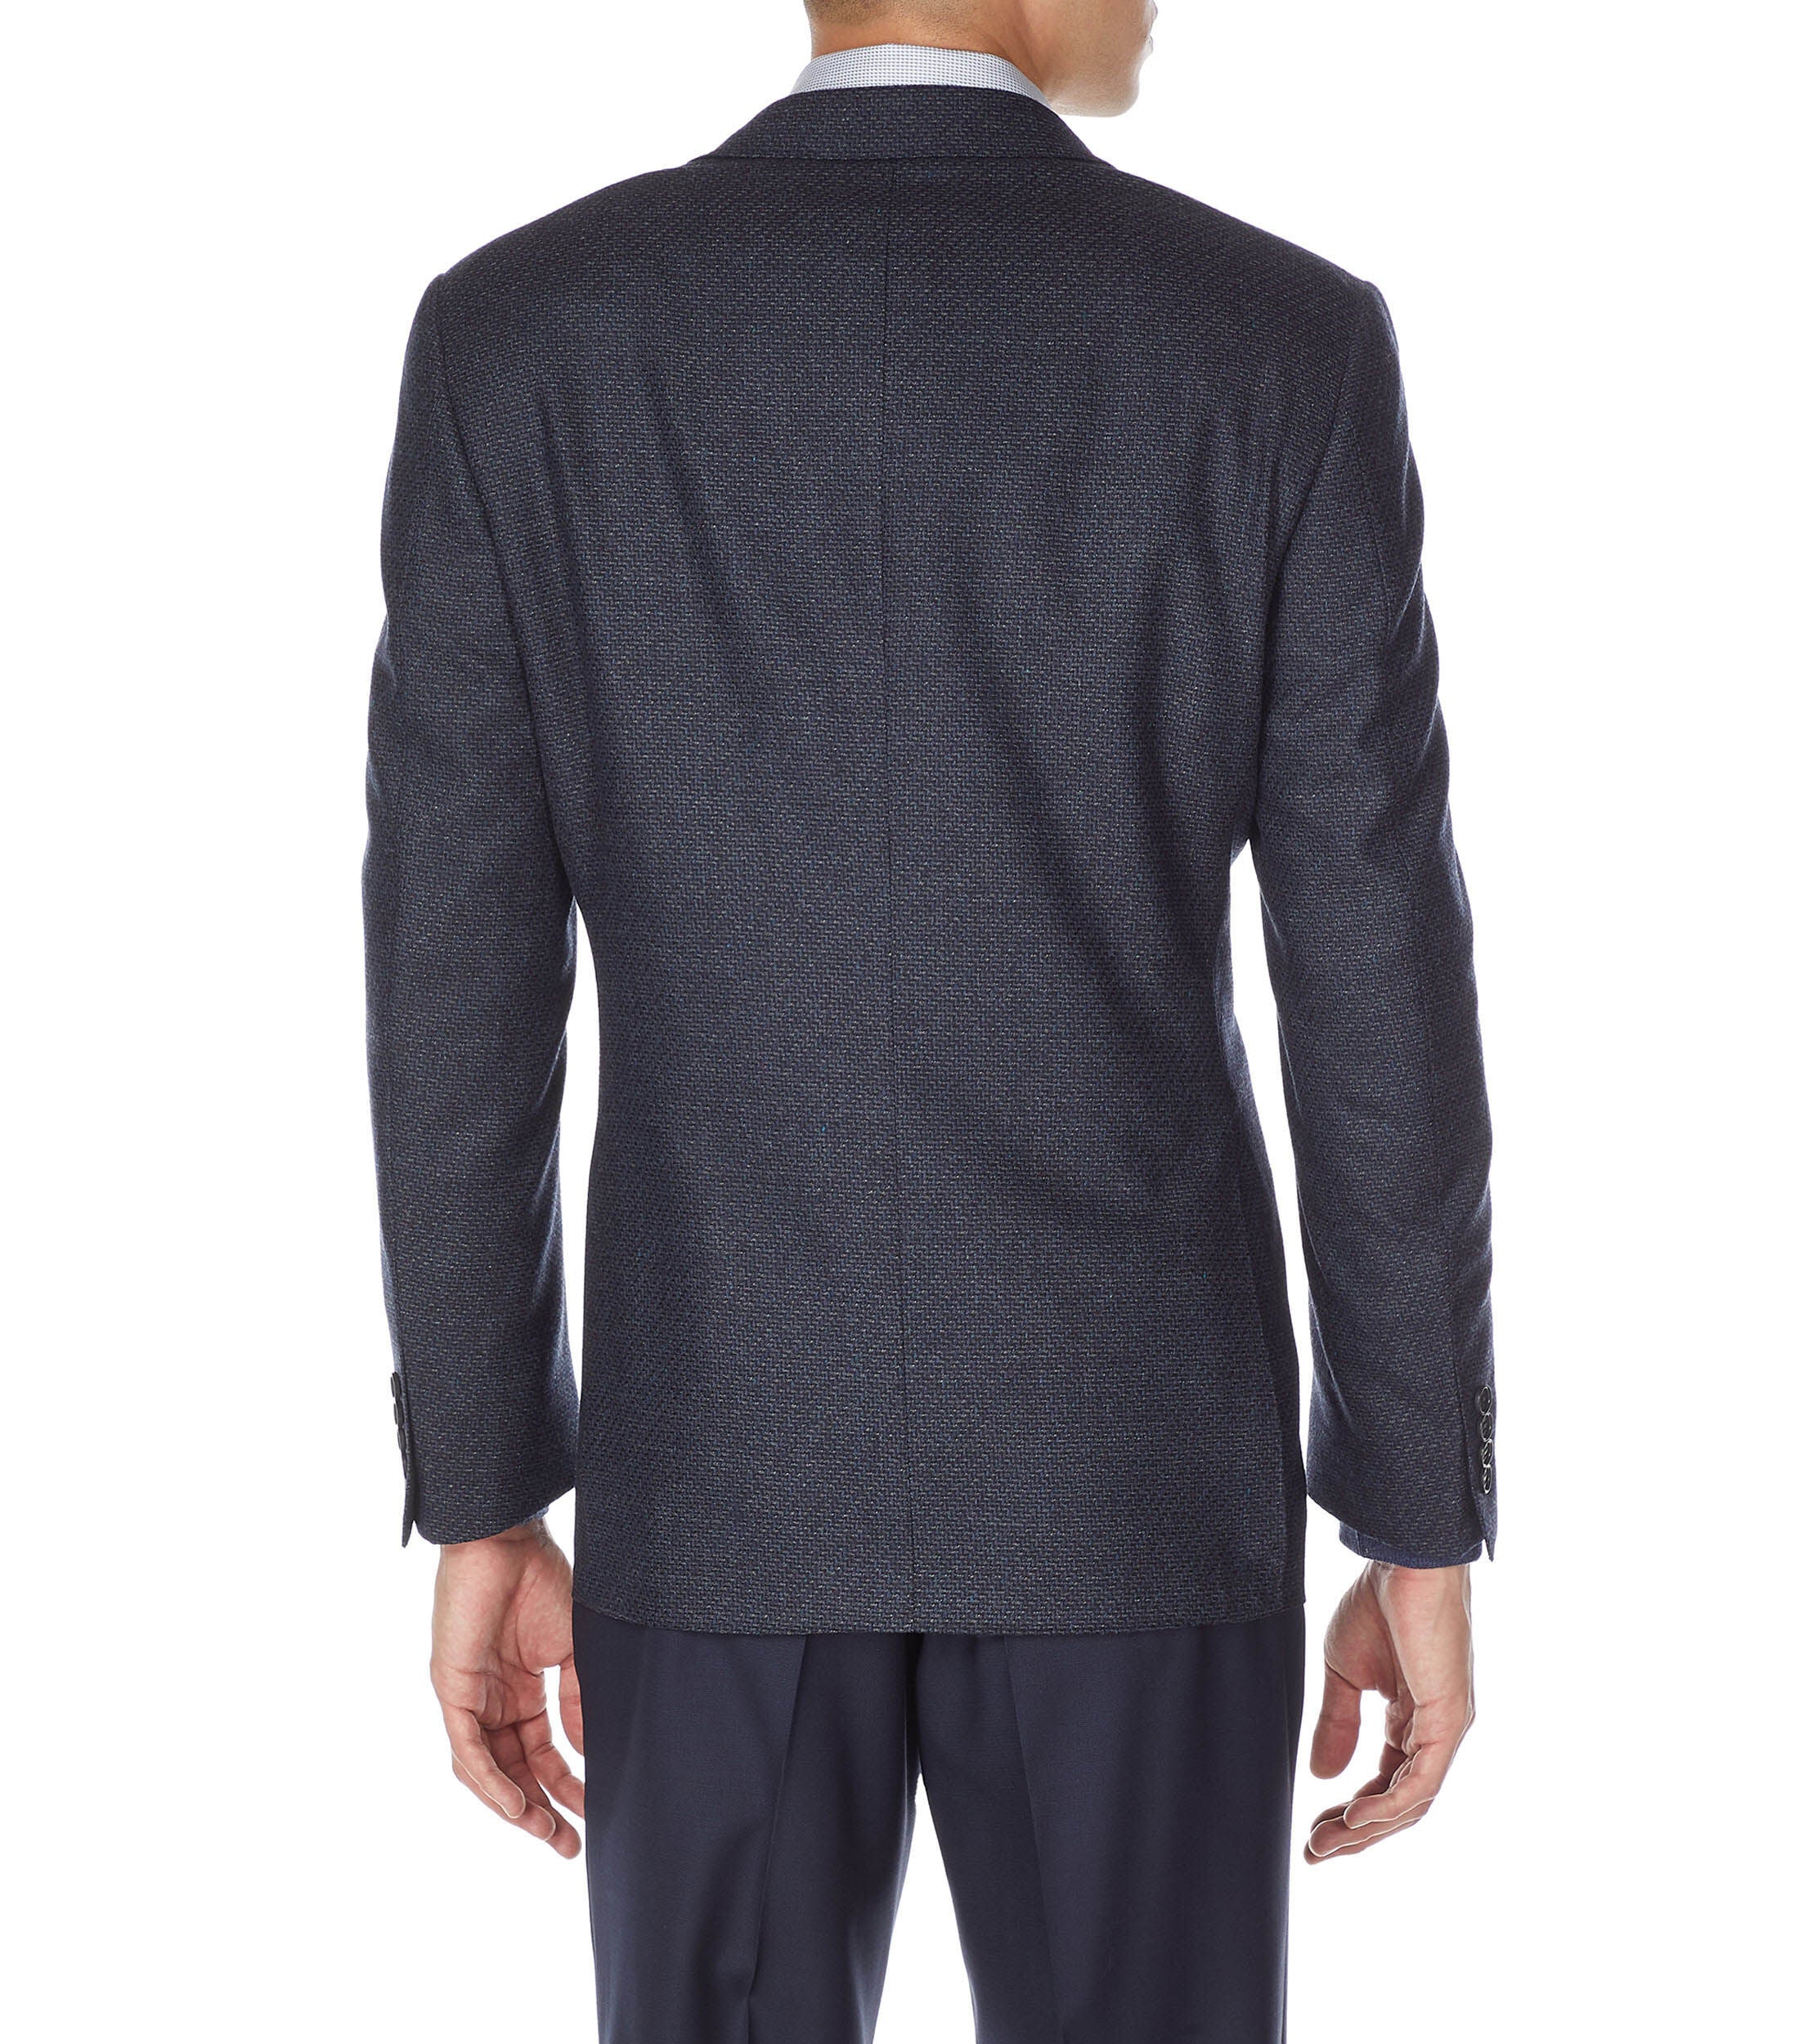 Canali - Blue 2 Button Jacket with Zig-Zag Detail Fabric CU04651.302